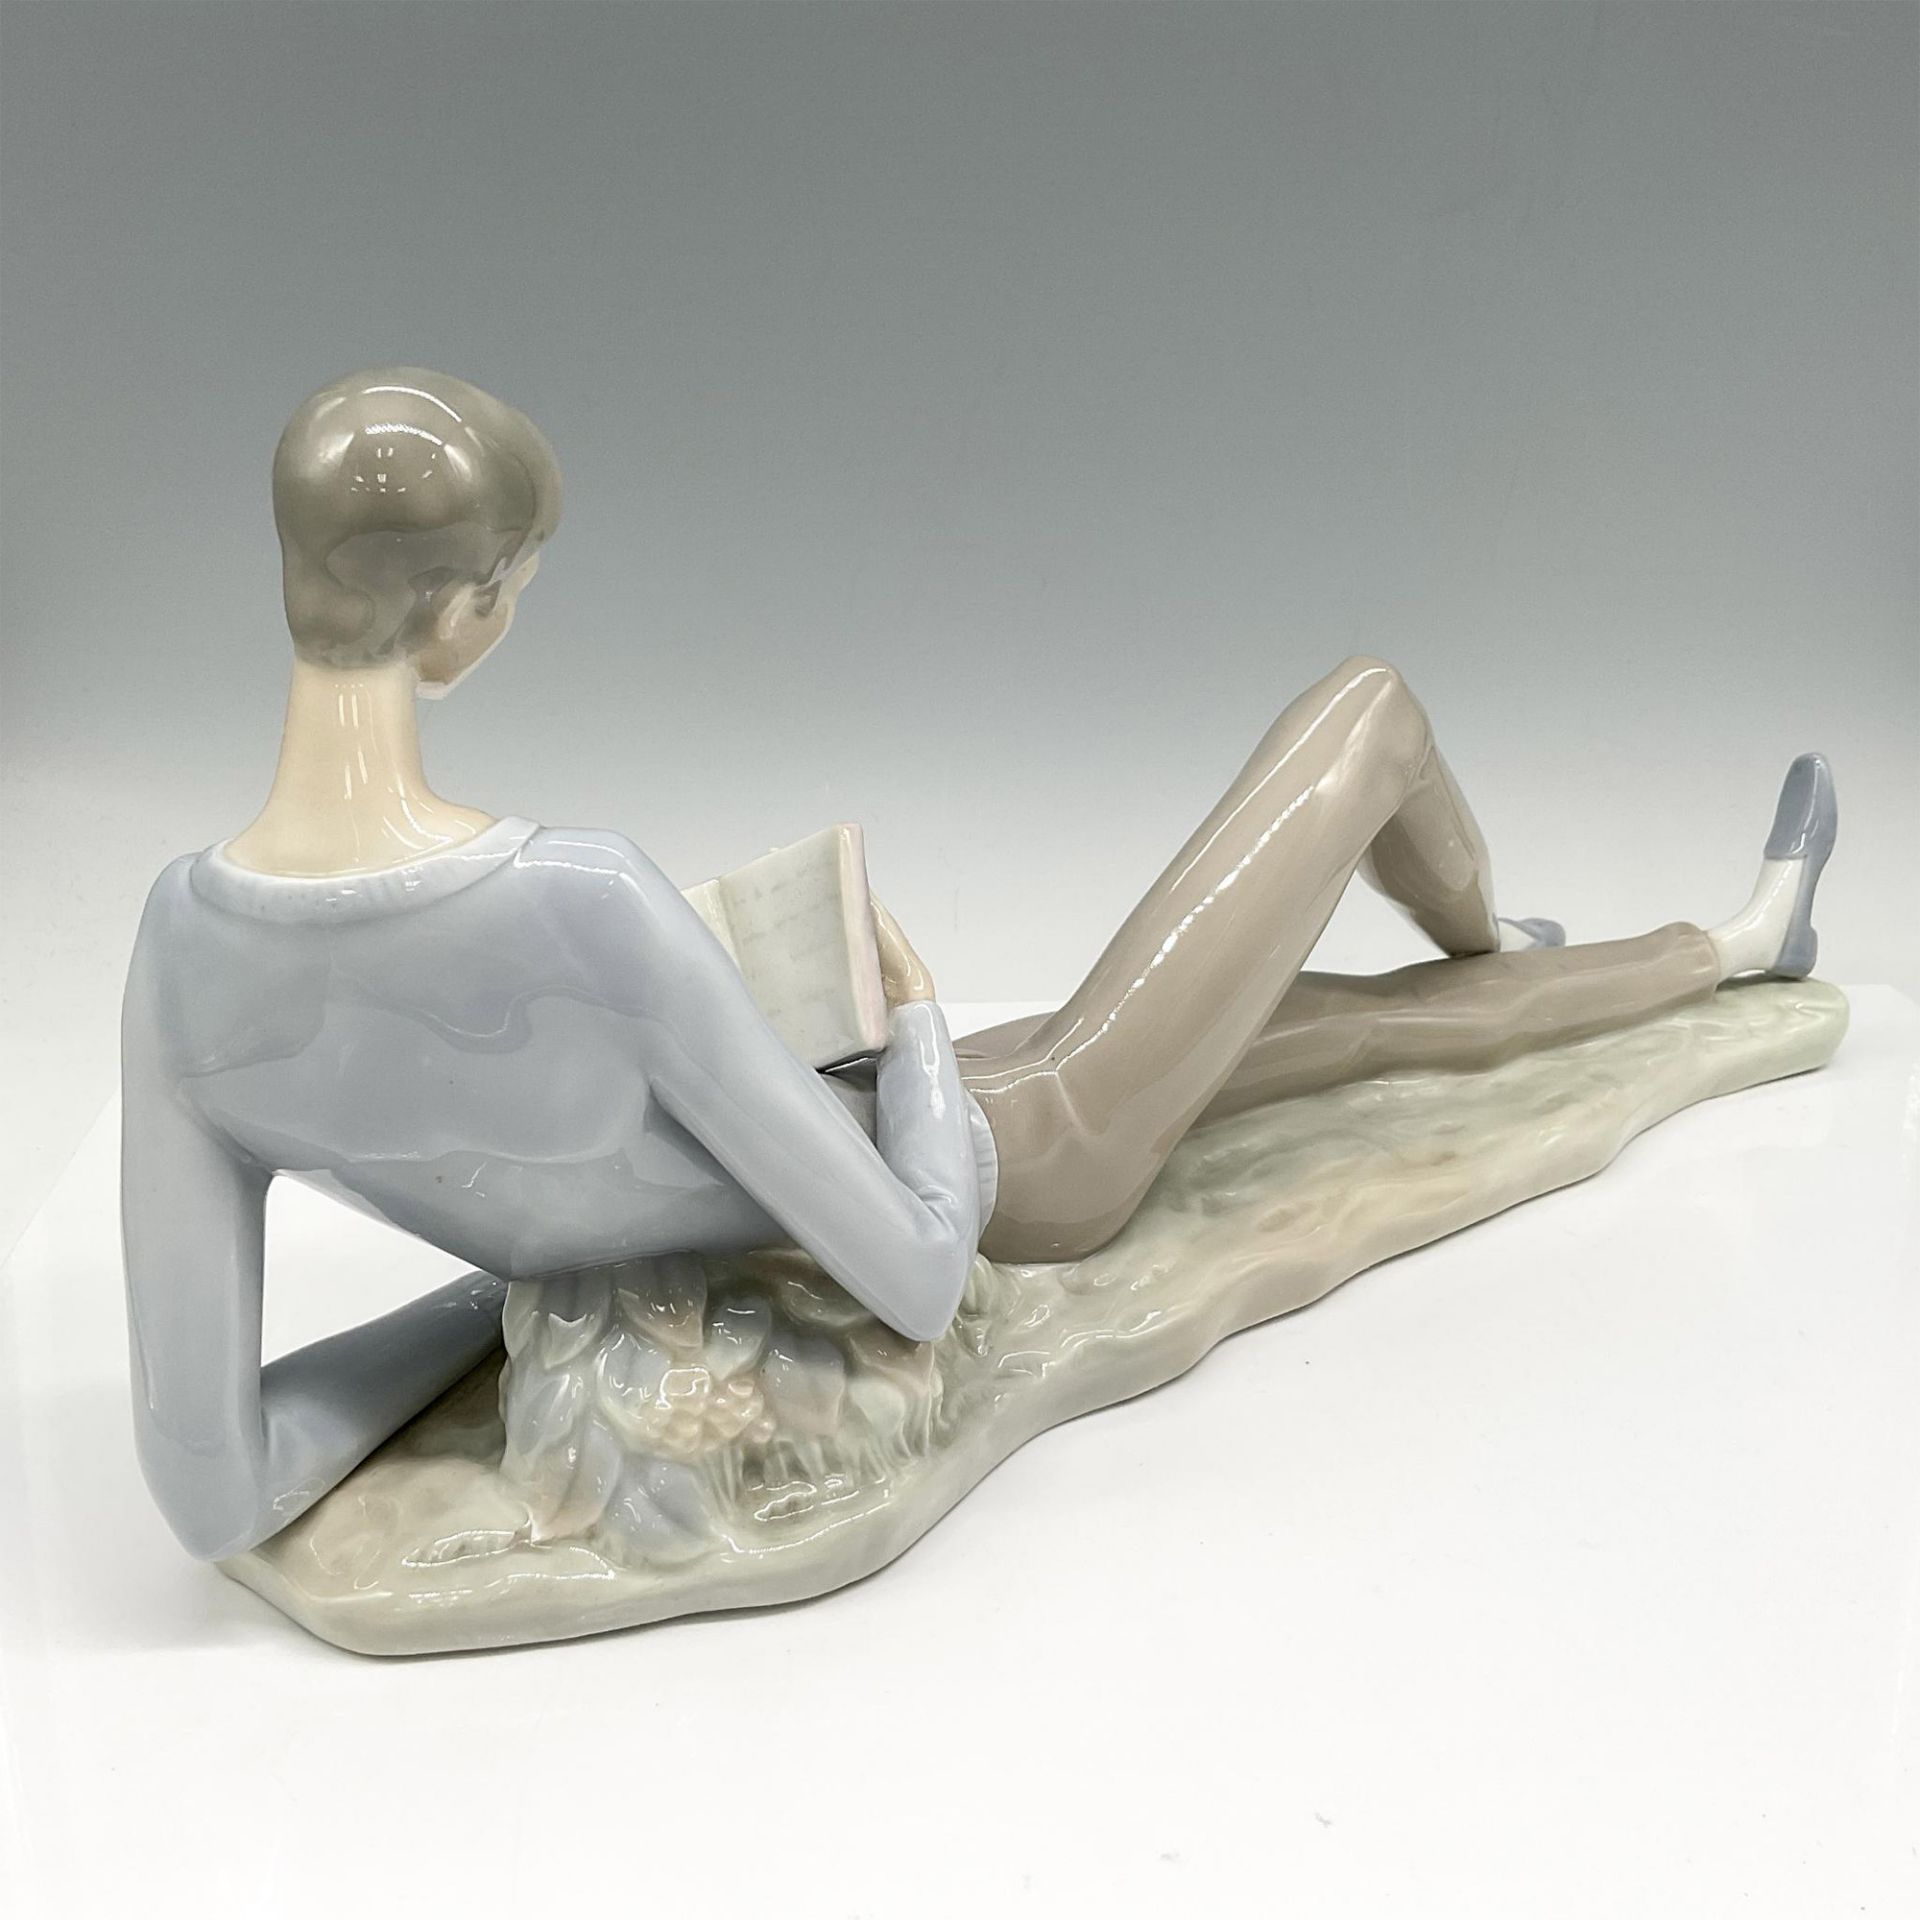 Boy with Book 01001024 - Lladro Porcelain Figurine - Image 2 of 3